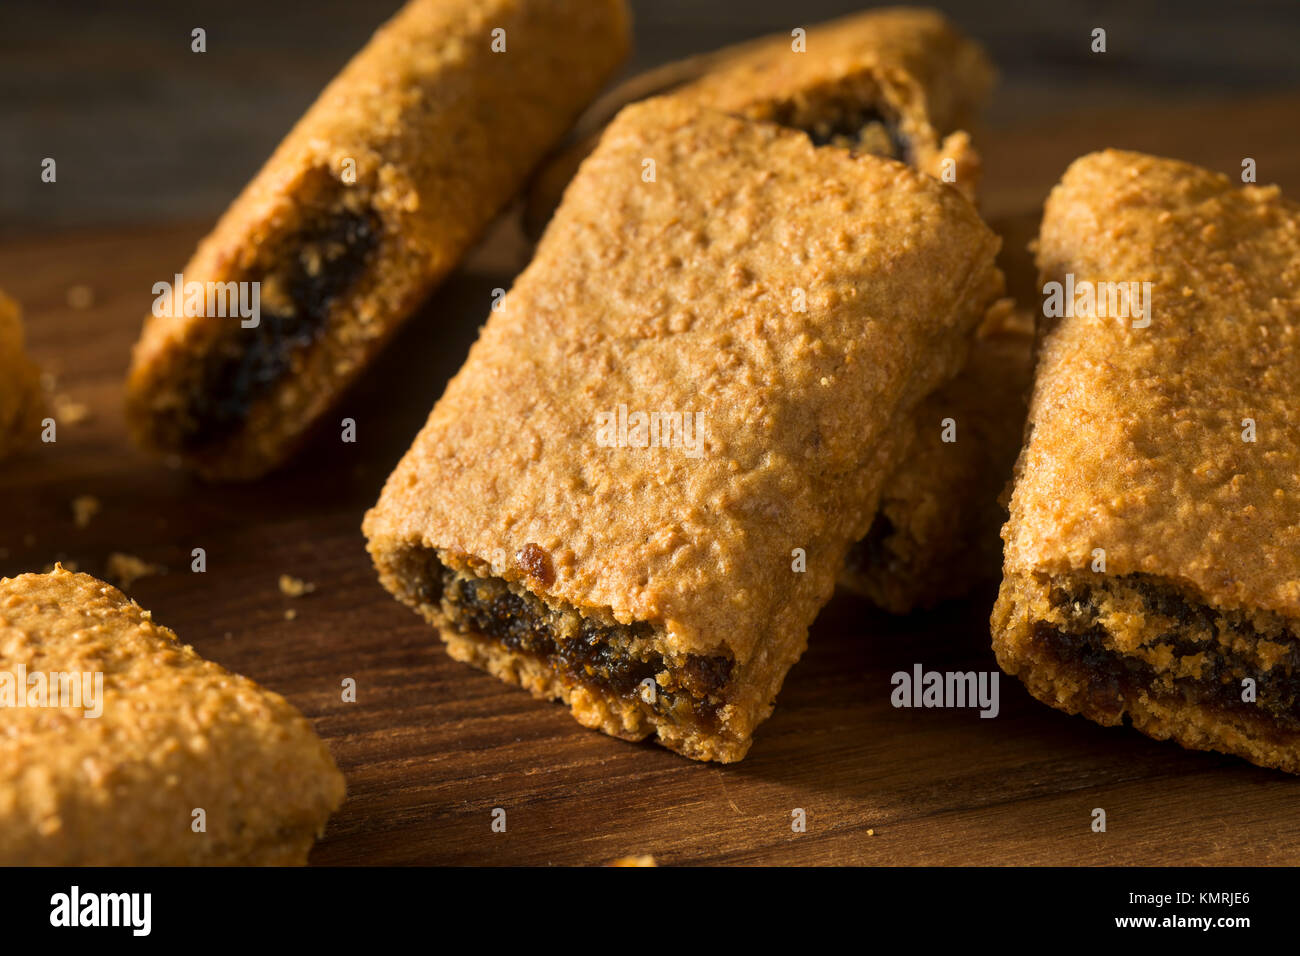 Healthy Homemade Fig Fruit Bars Ready to Eat Stock Photo